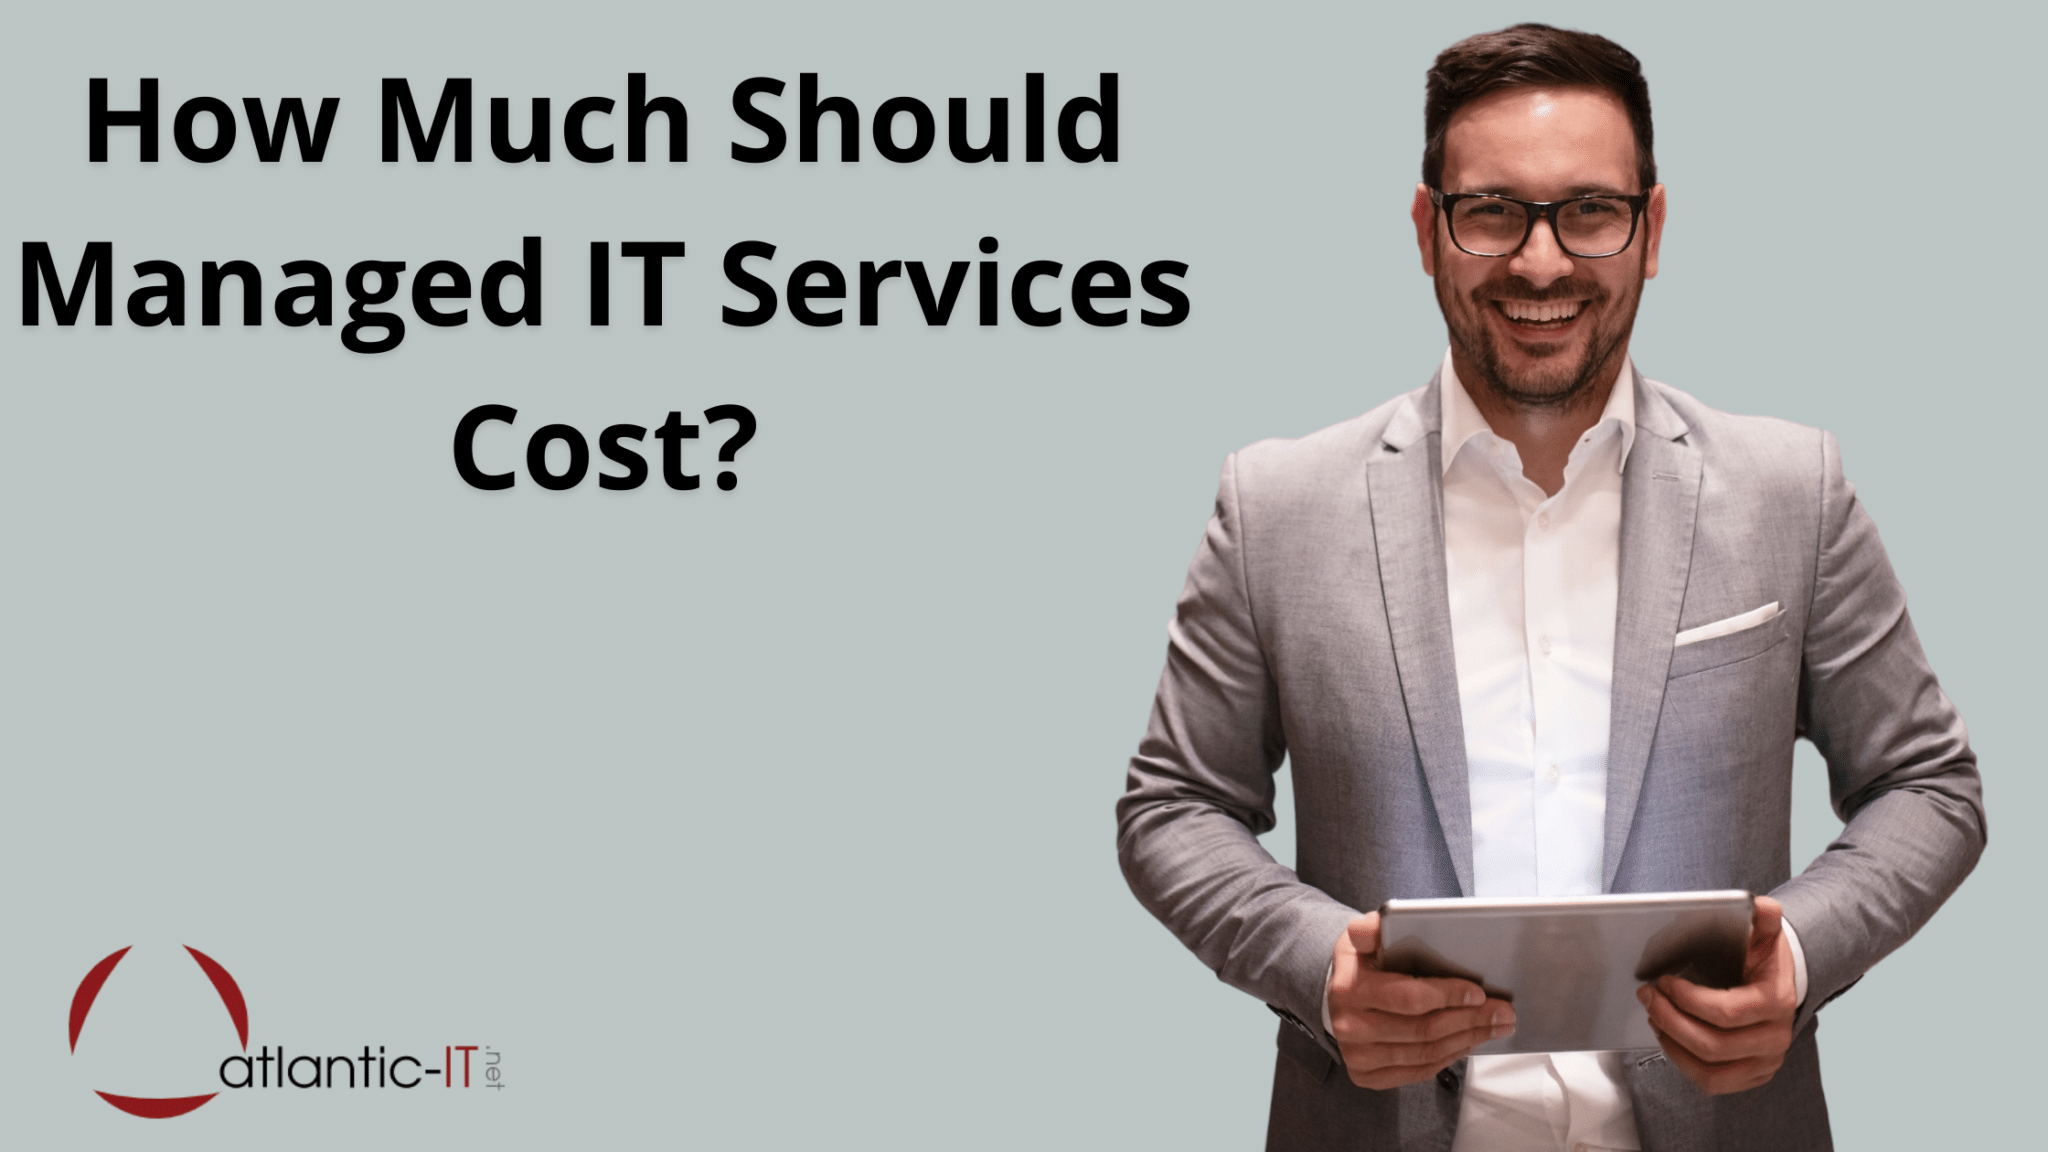 How Much Should Managed IT Services Cost?